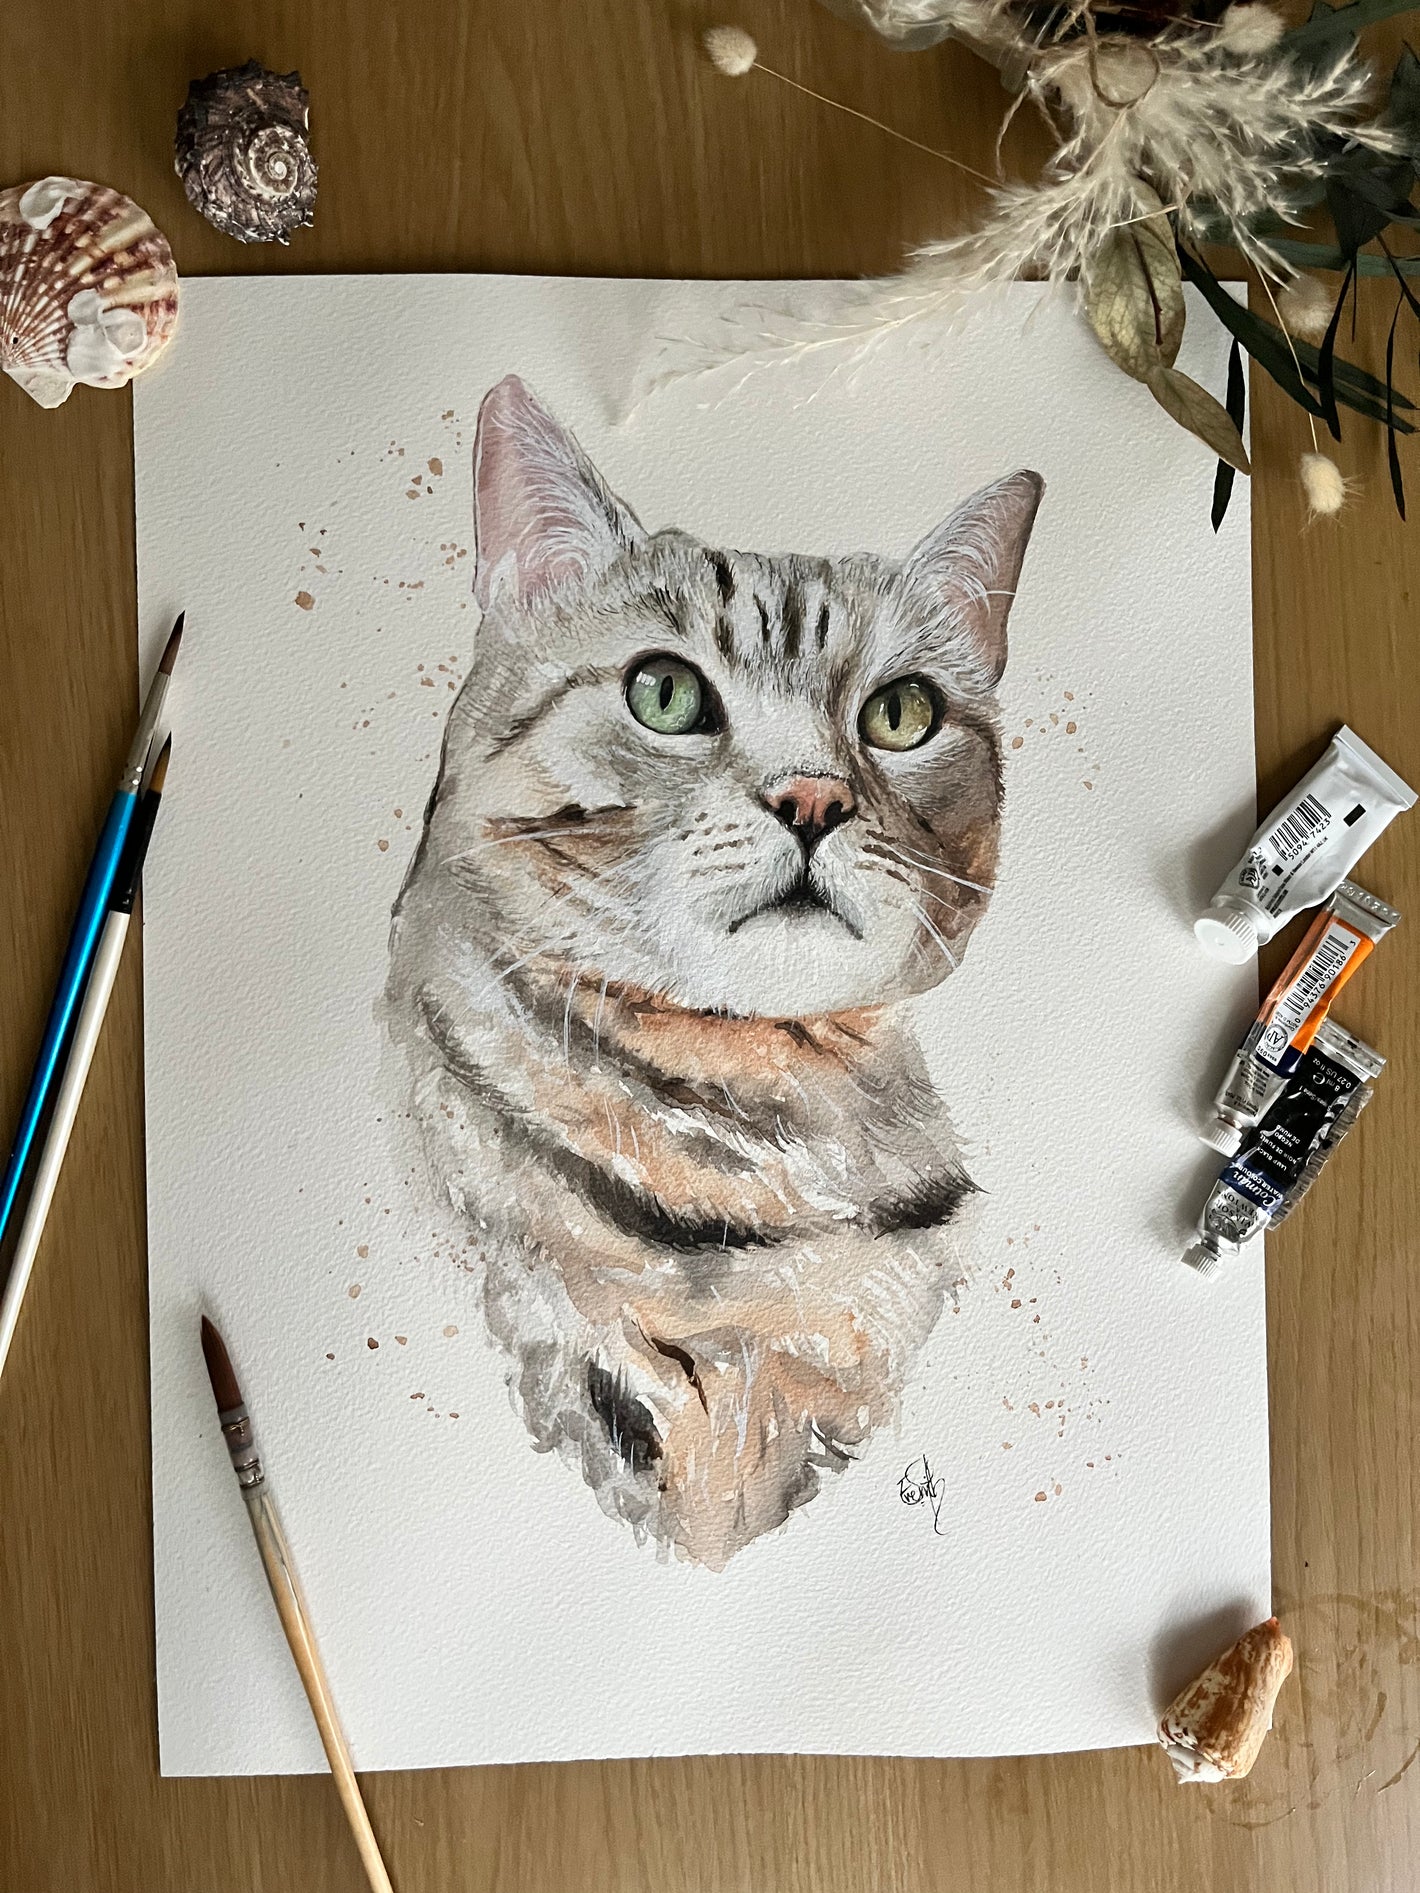 An eye-catching watercolour cat portait by Cleethorpes artist, Eve Leoni Smith.